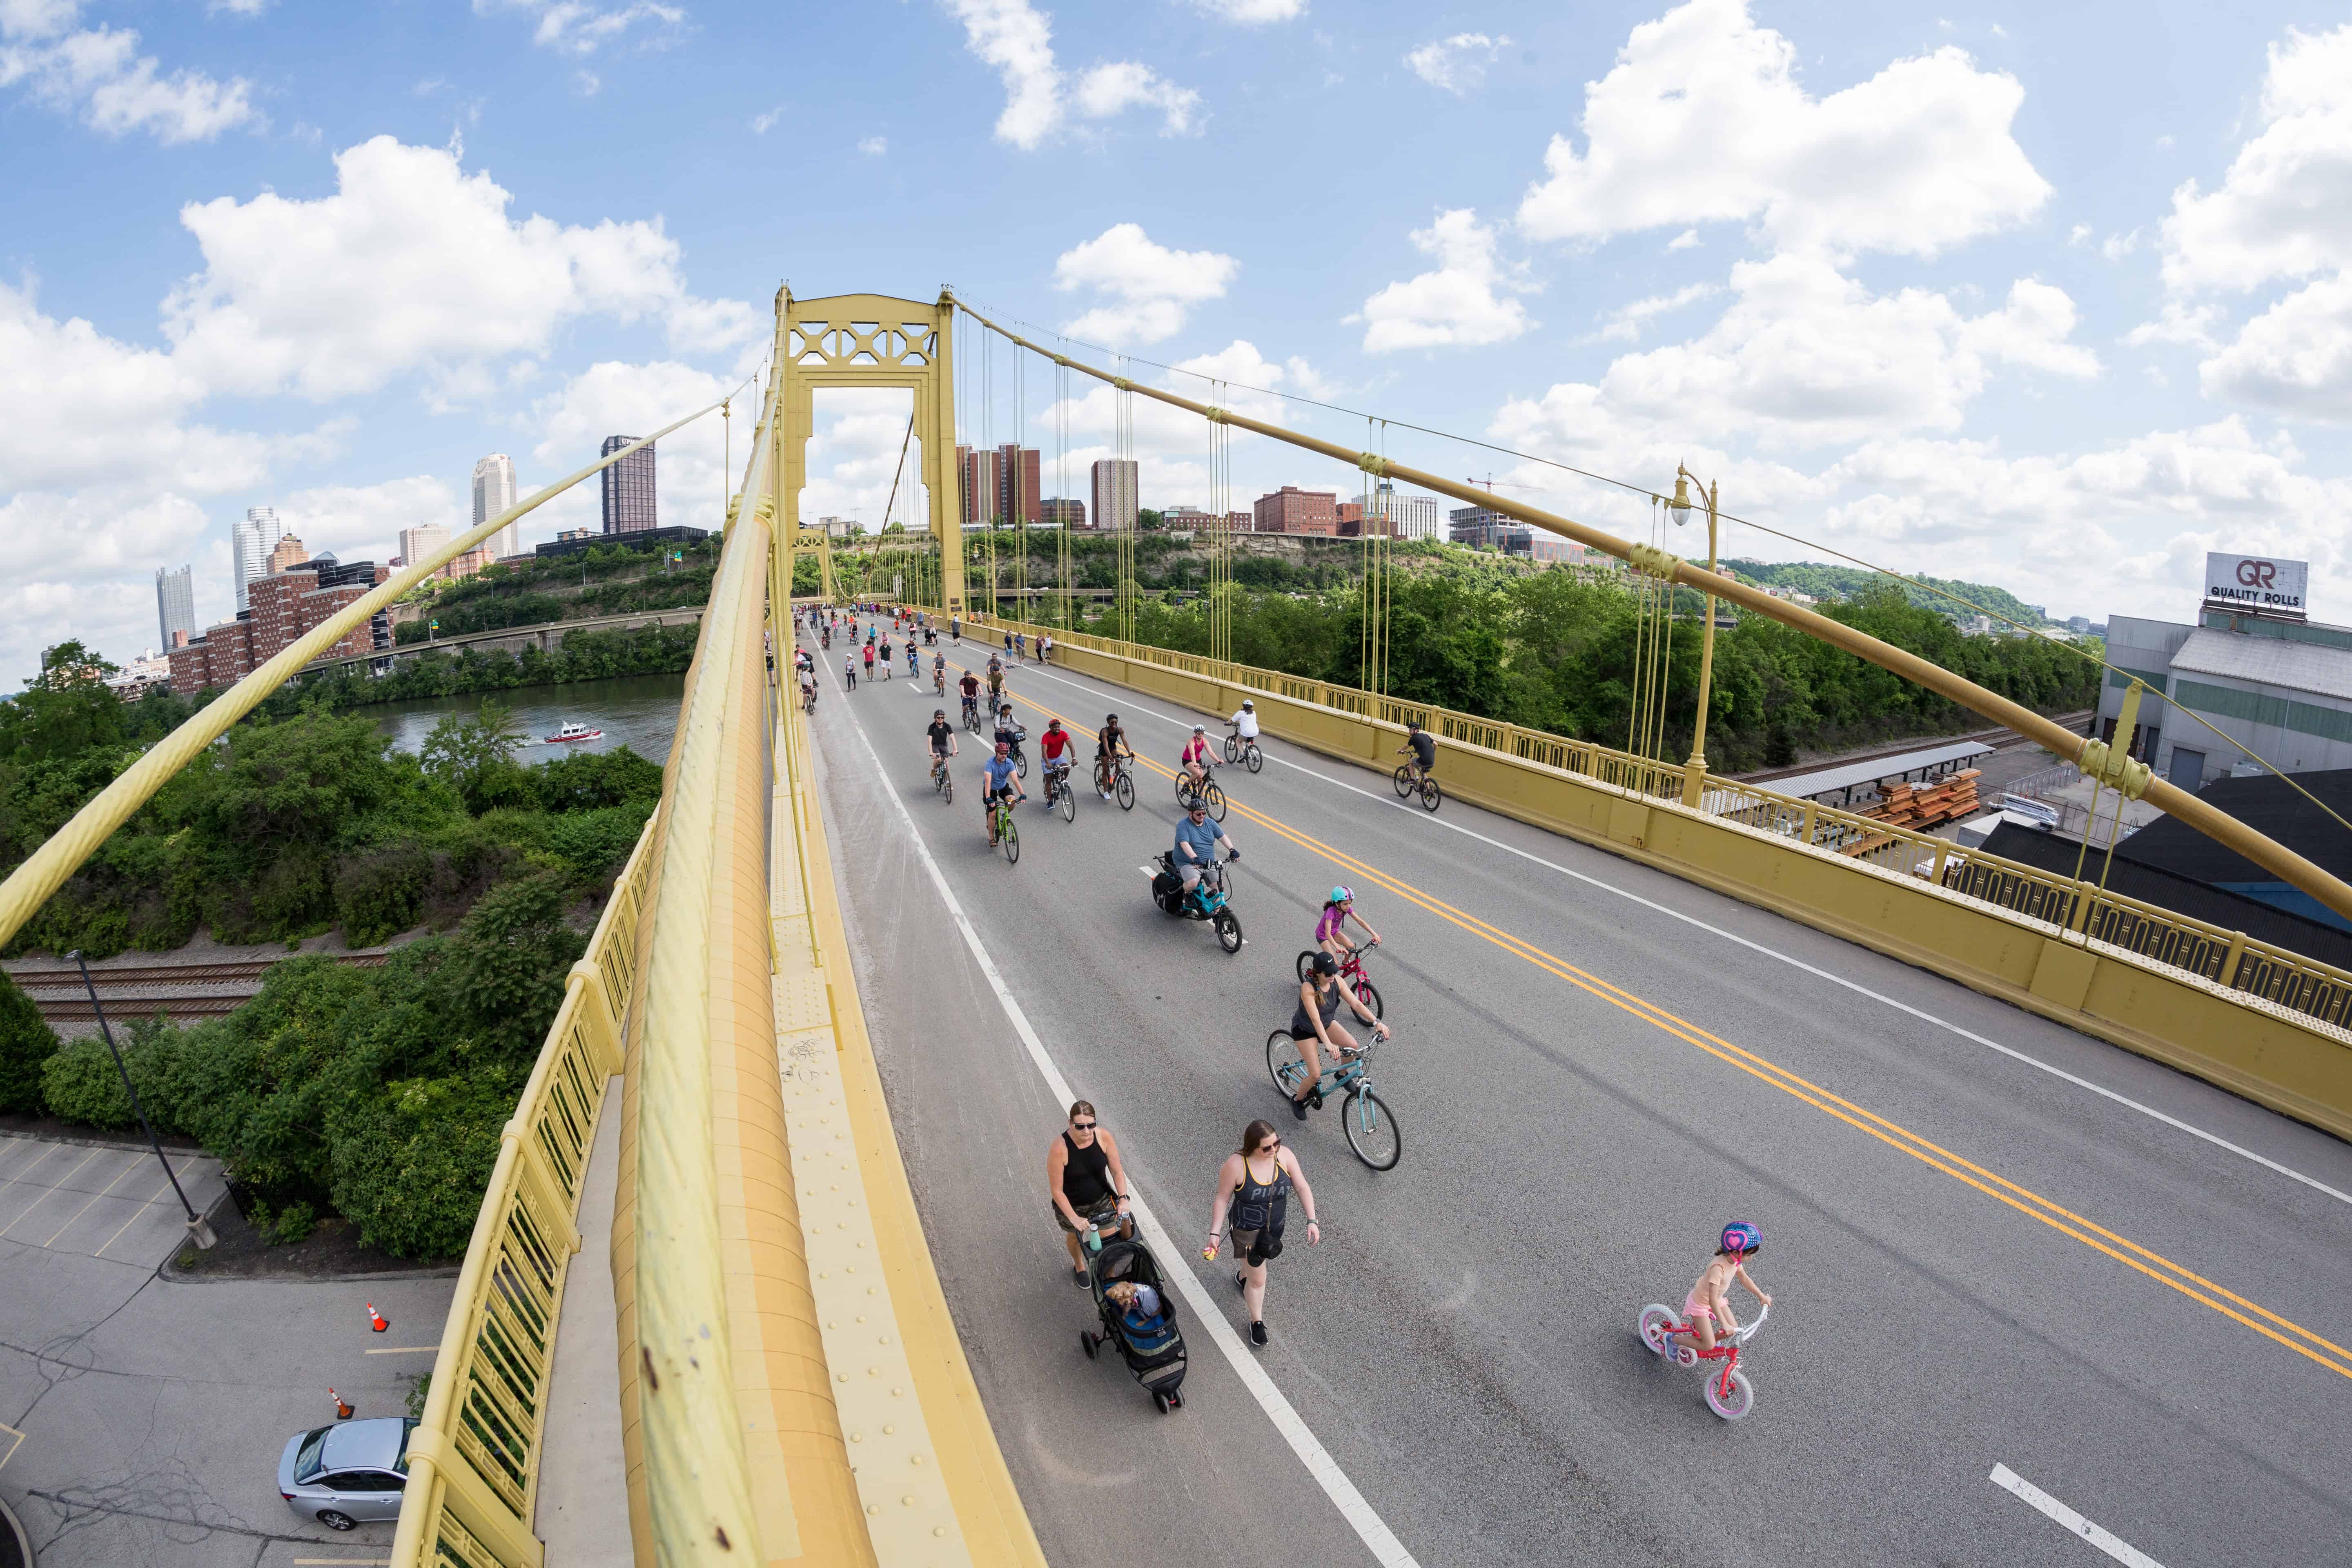 Large yellow suspension bridge with bikers and walkers going across with blue skies and city line in the background.